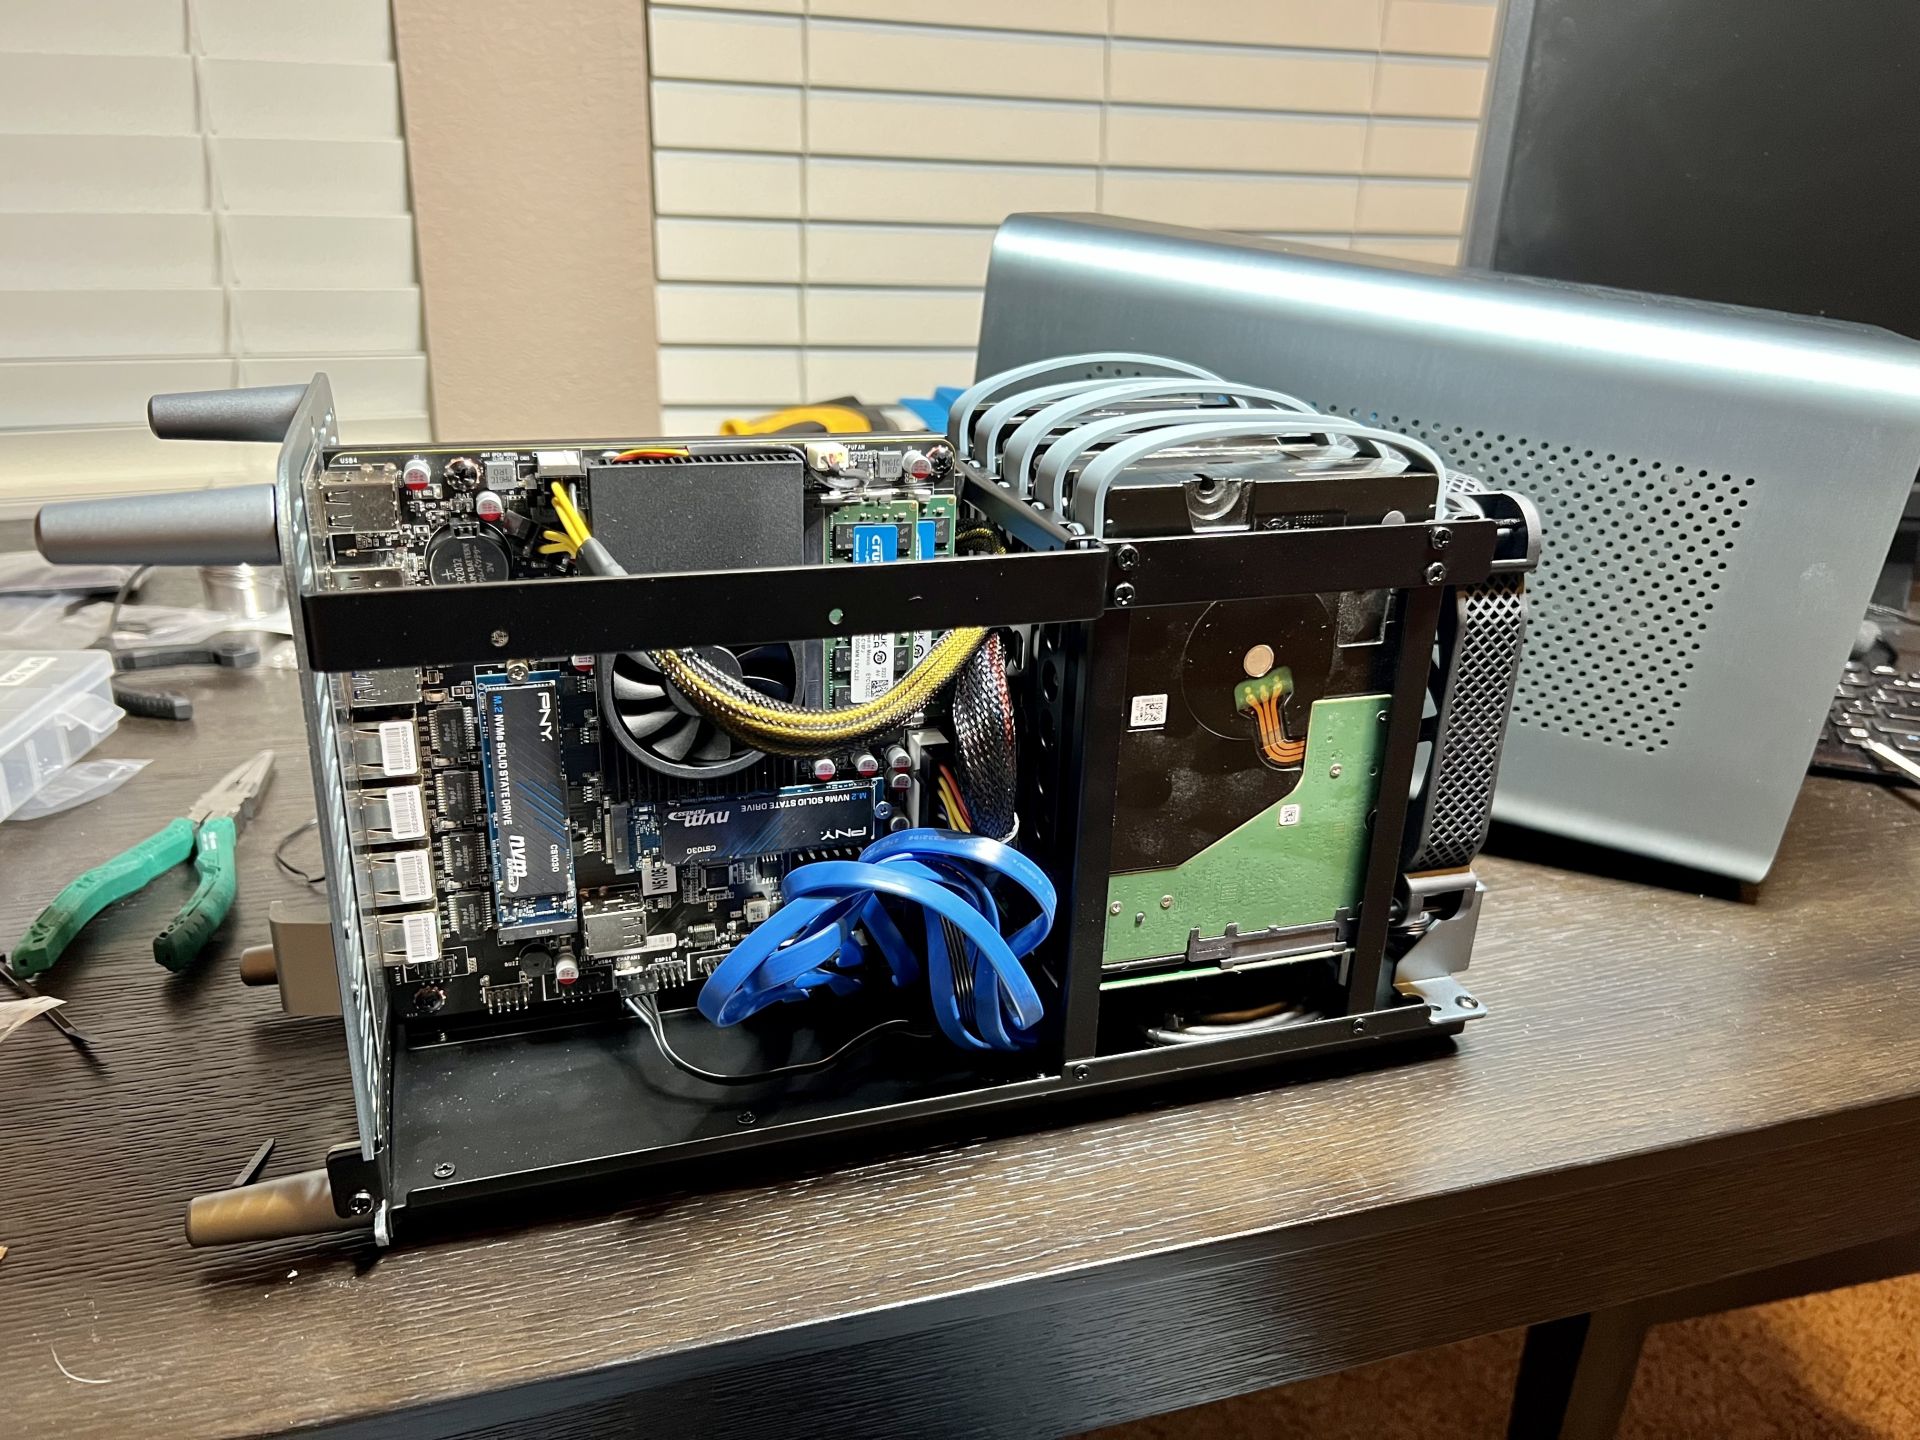 Build a Raspberry Pi NAS they said. It will be easy